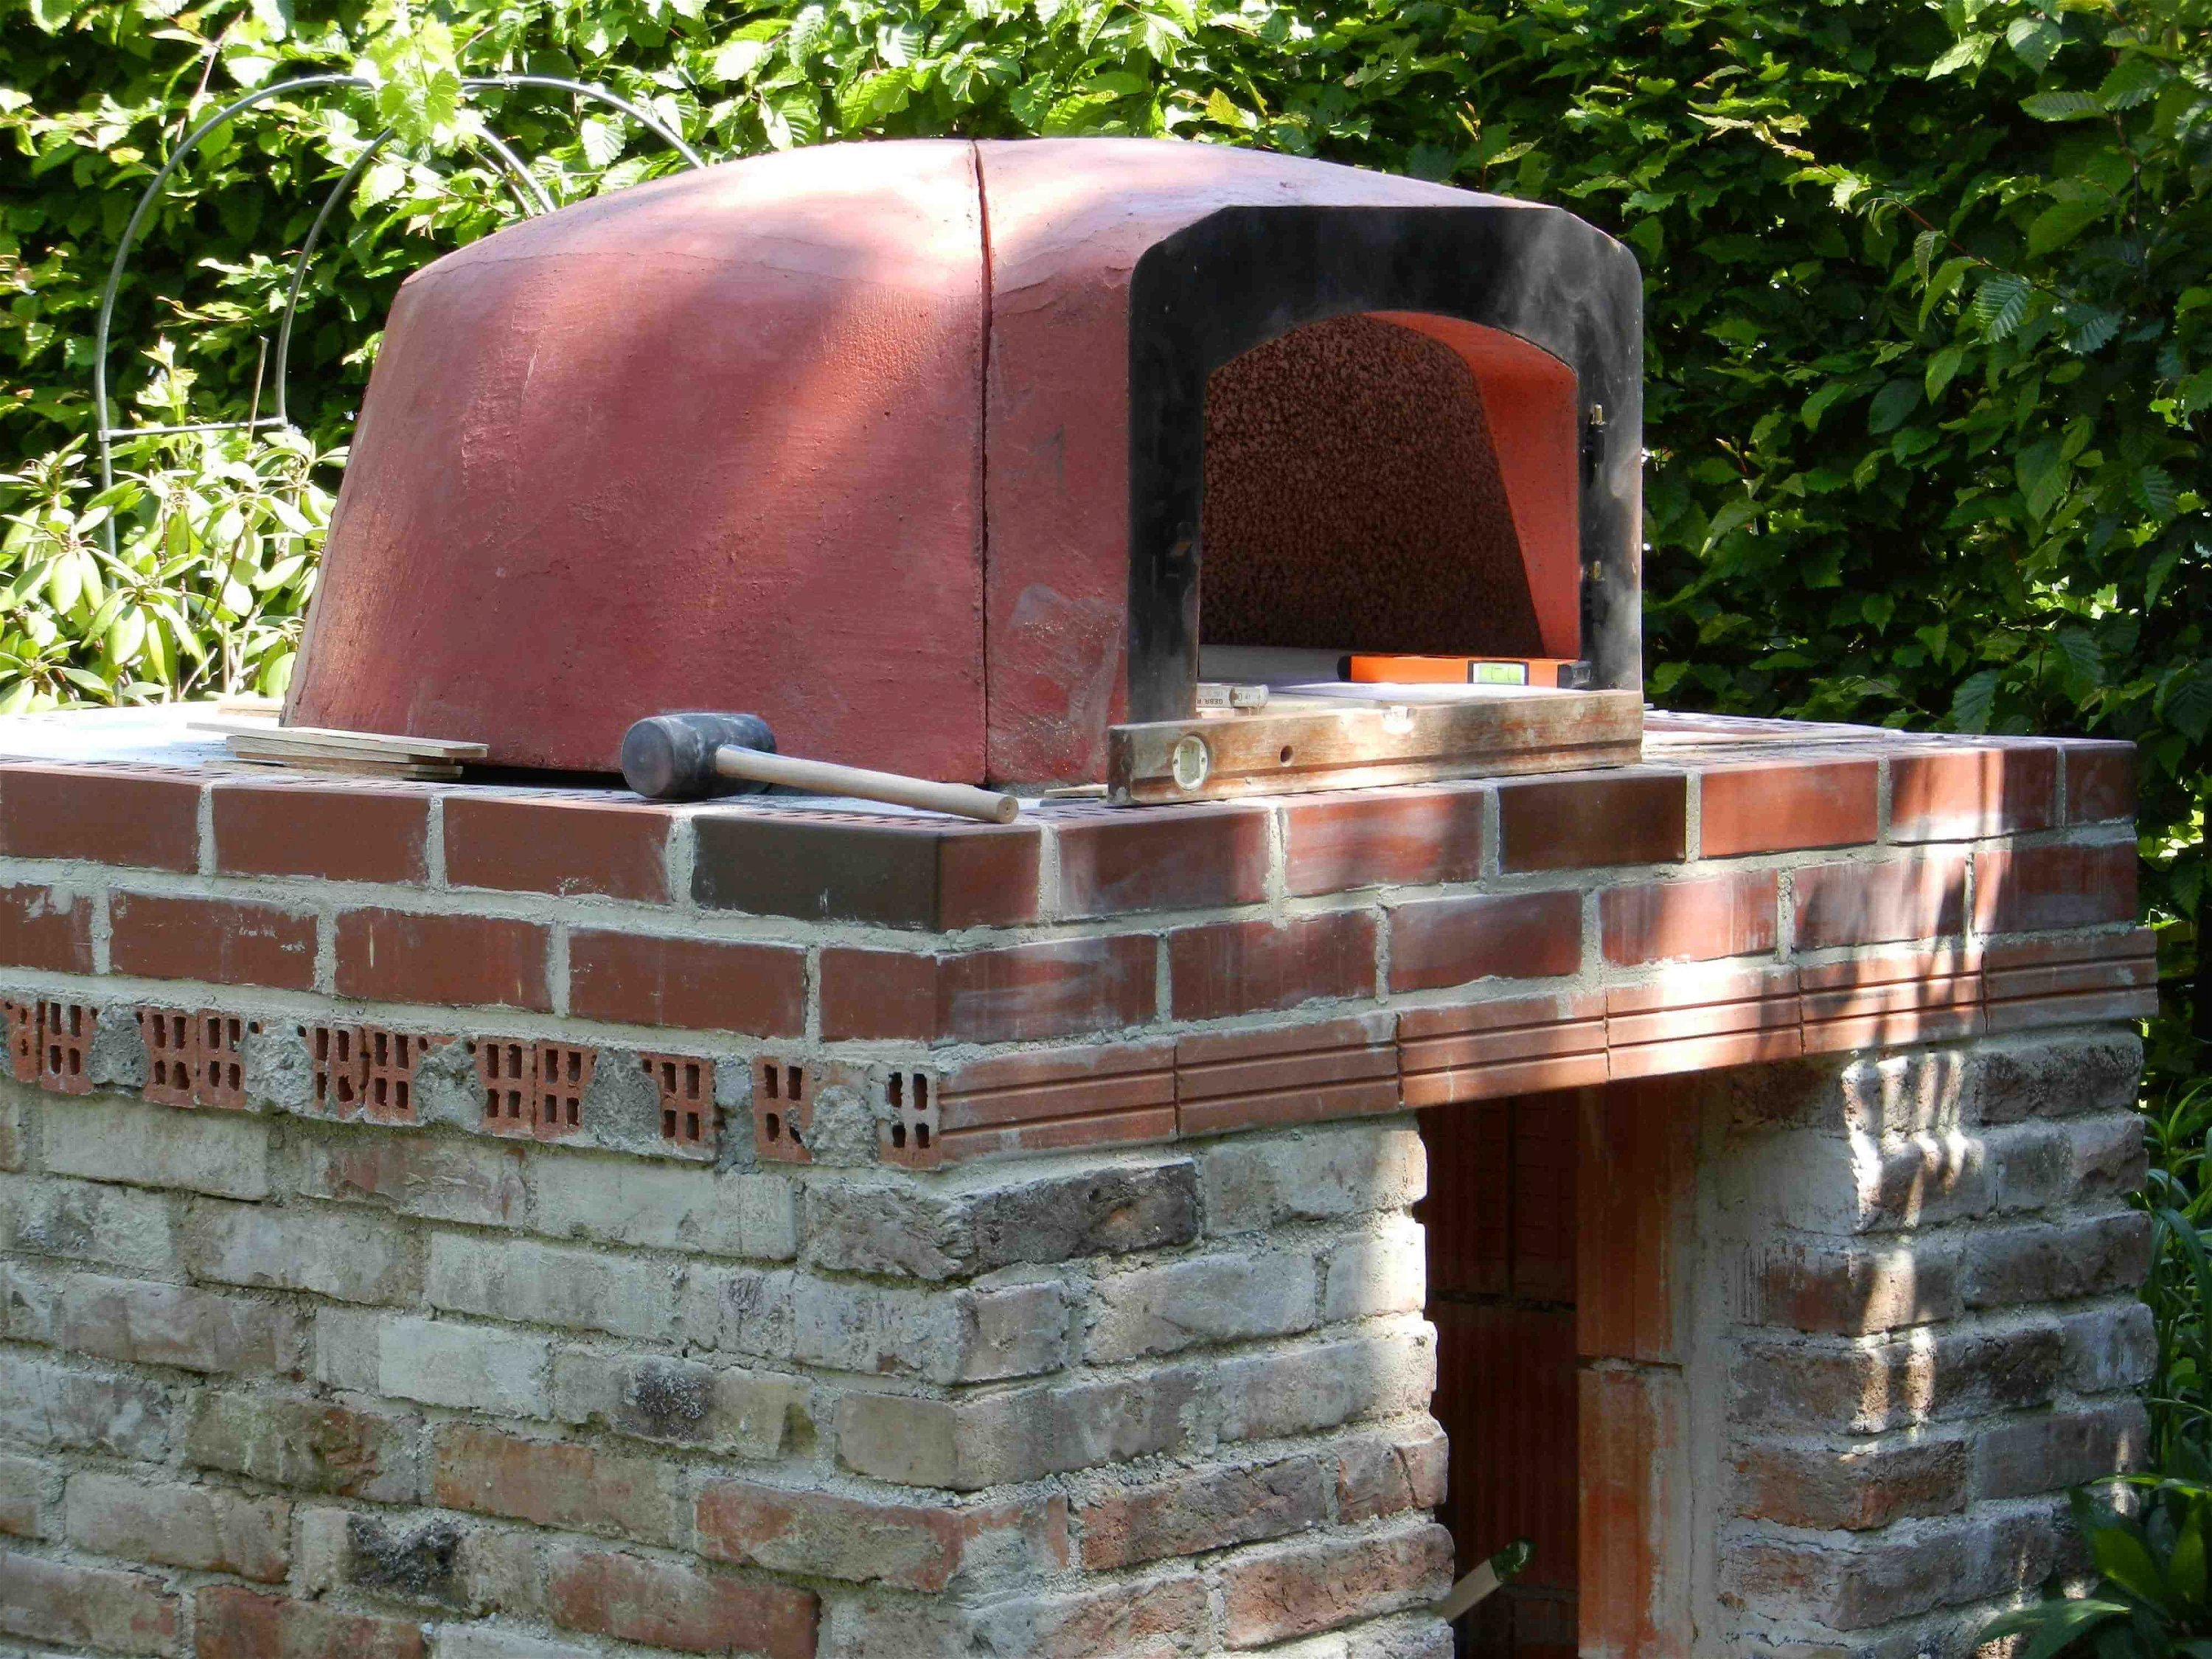 Pizza oven Valoriani TOP kit for garden and outdoor kitchen, diameter 100cm